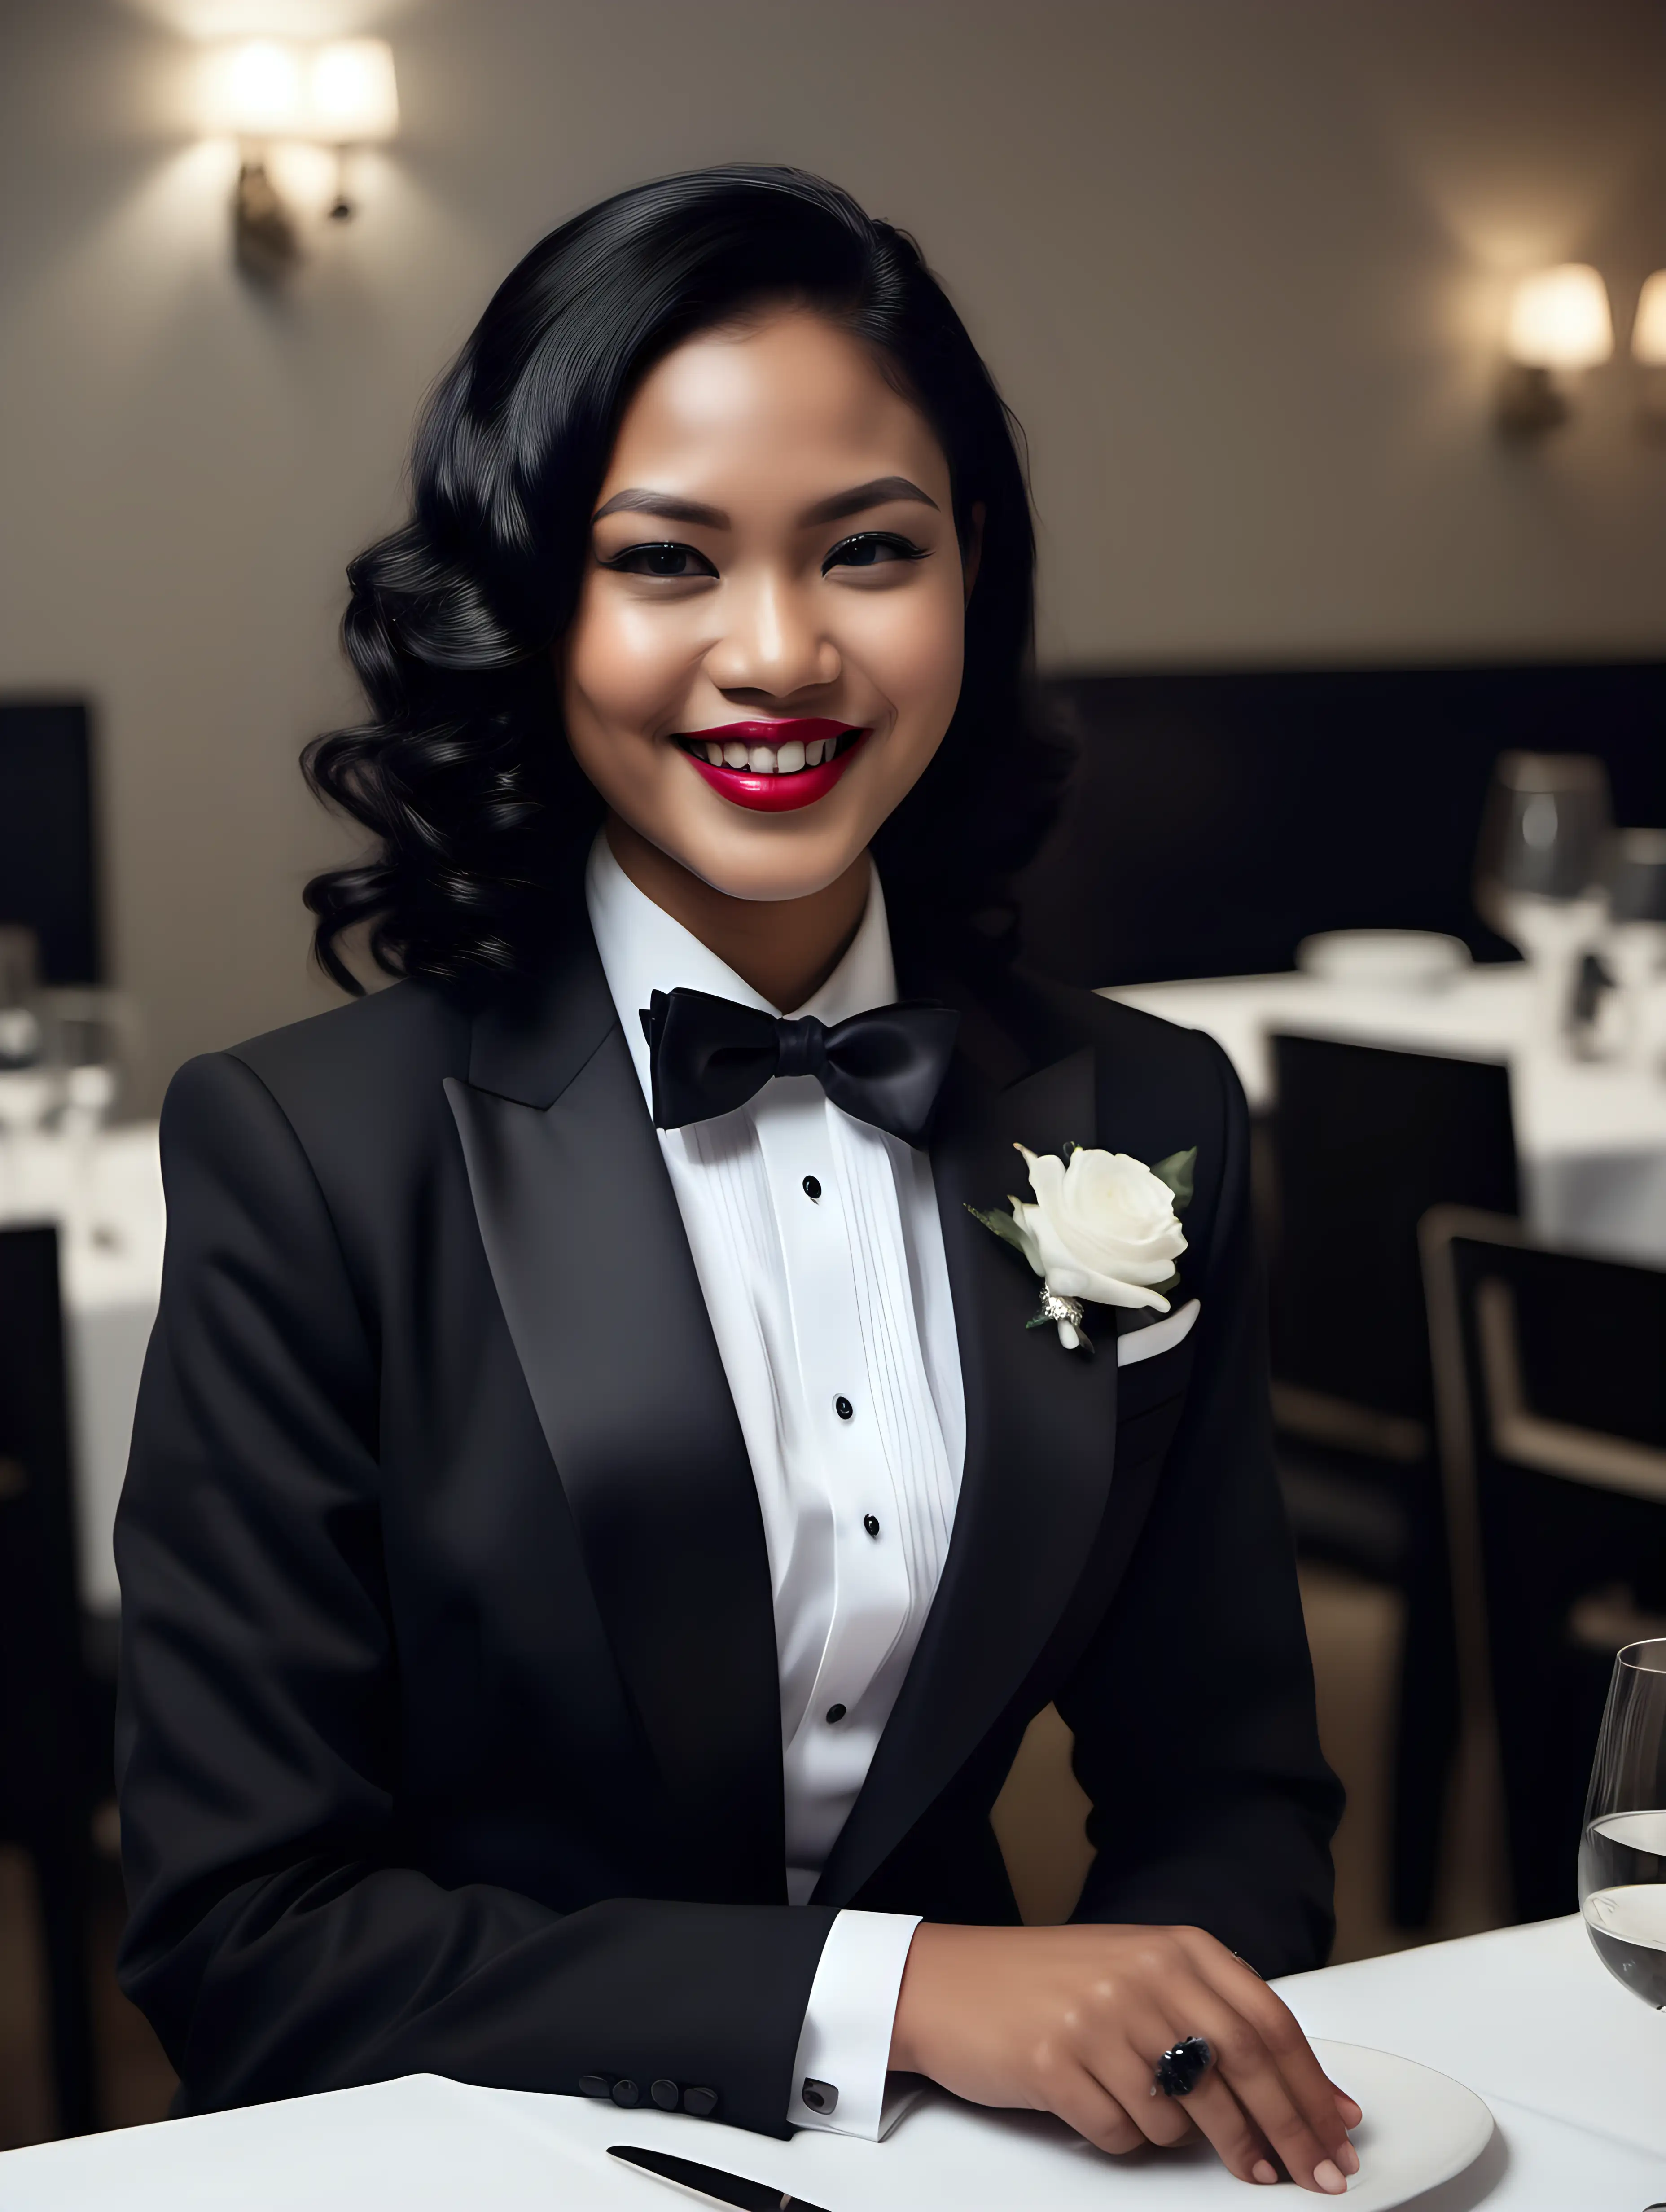 30 year old grinning dark skinned Indonesian businesswoman with black shoulder length hair and lipstick wearing a tuxedo with a black bow tie and big black cufflinks. Her jacket has a corsage. Her jacekt is open. She is sitting at a dinner table.